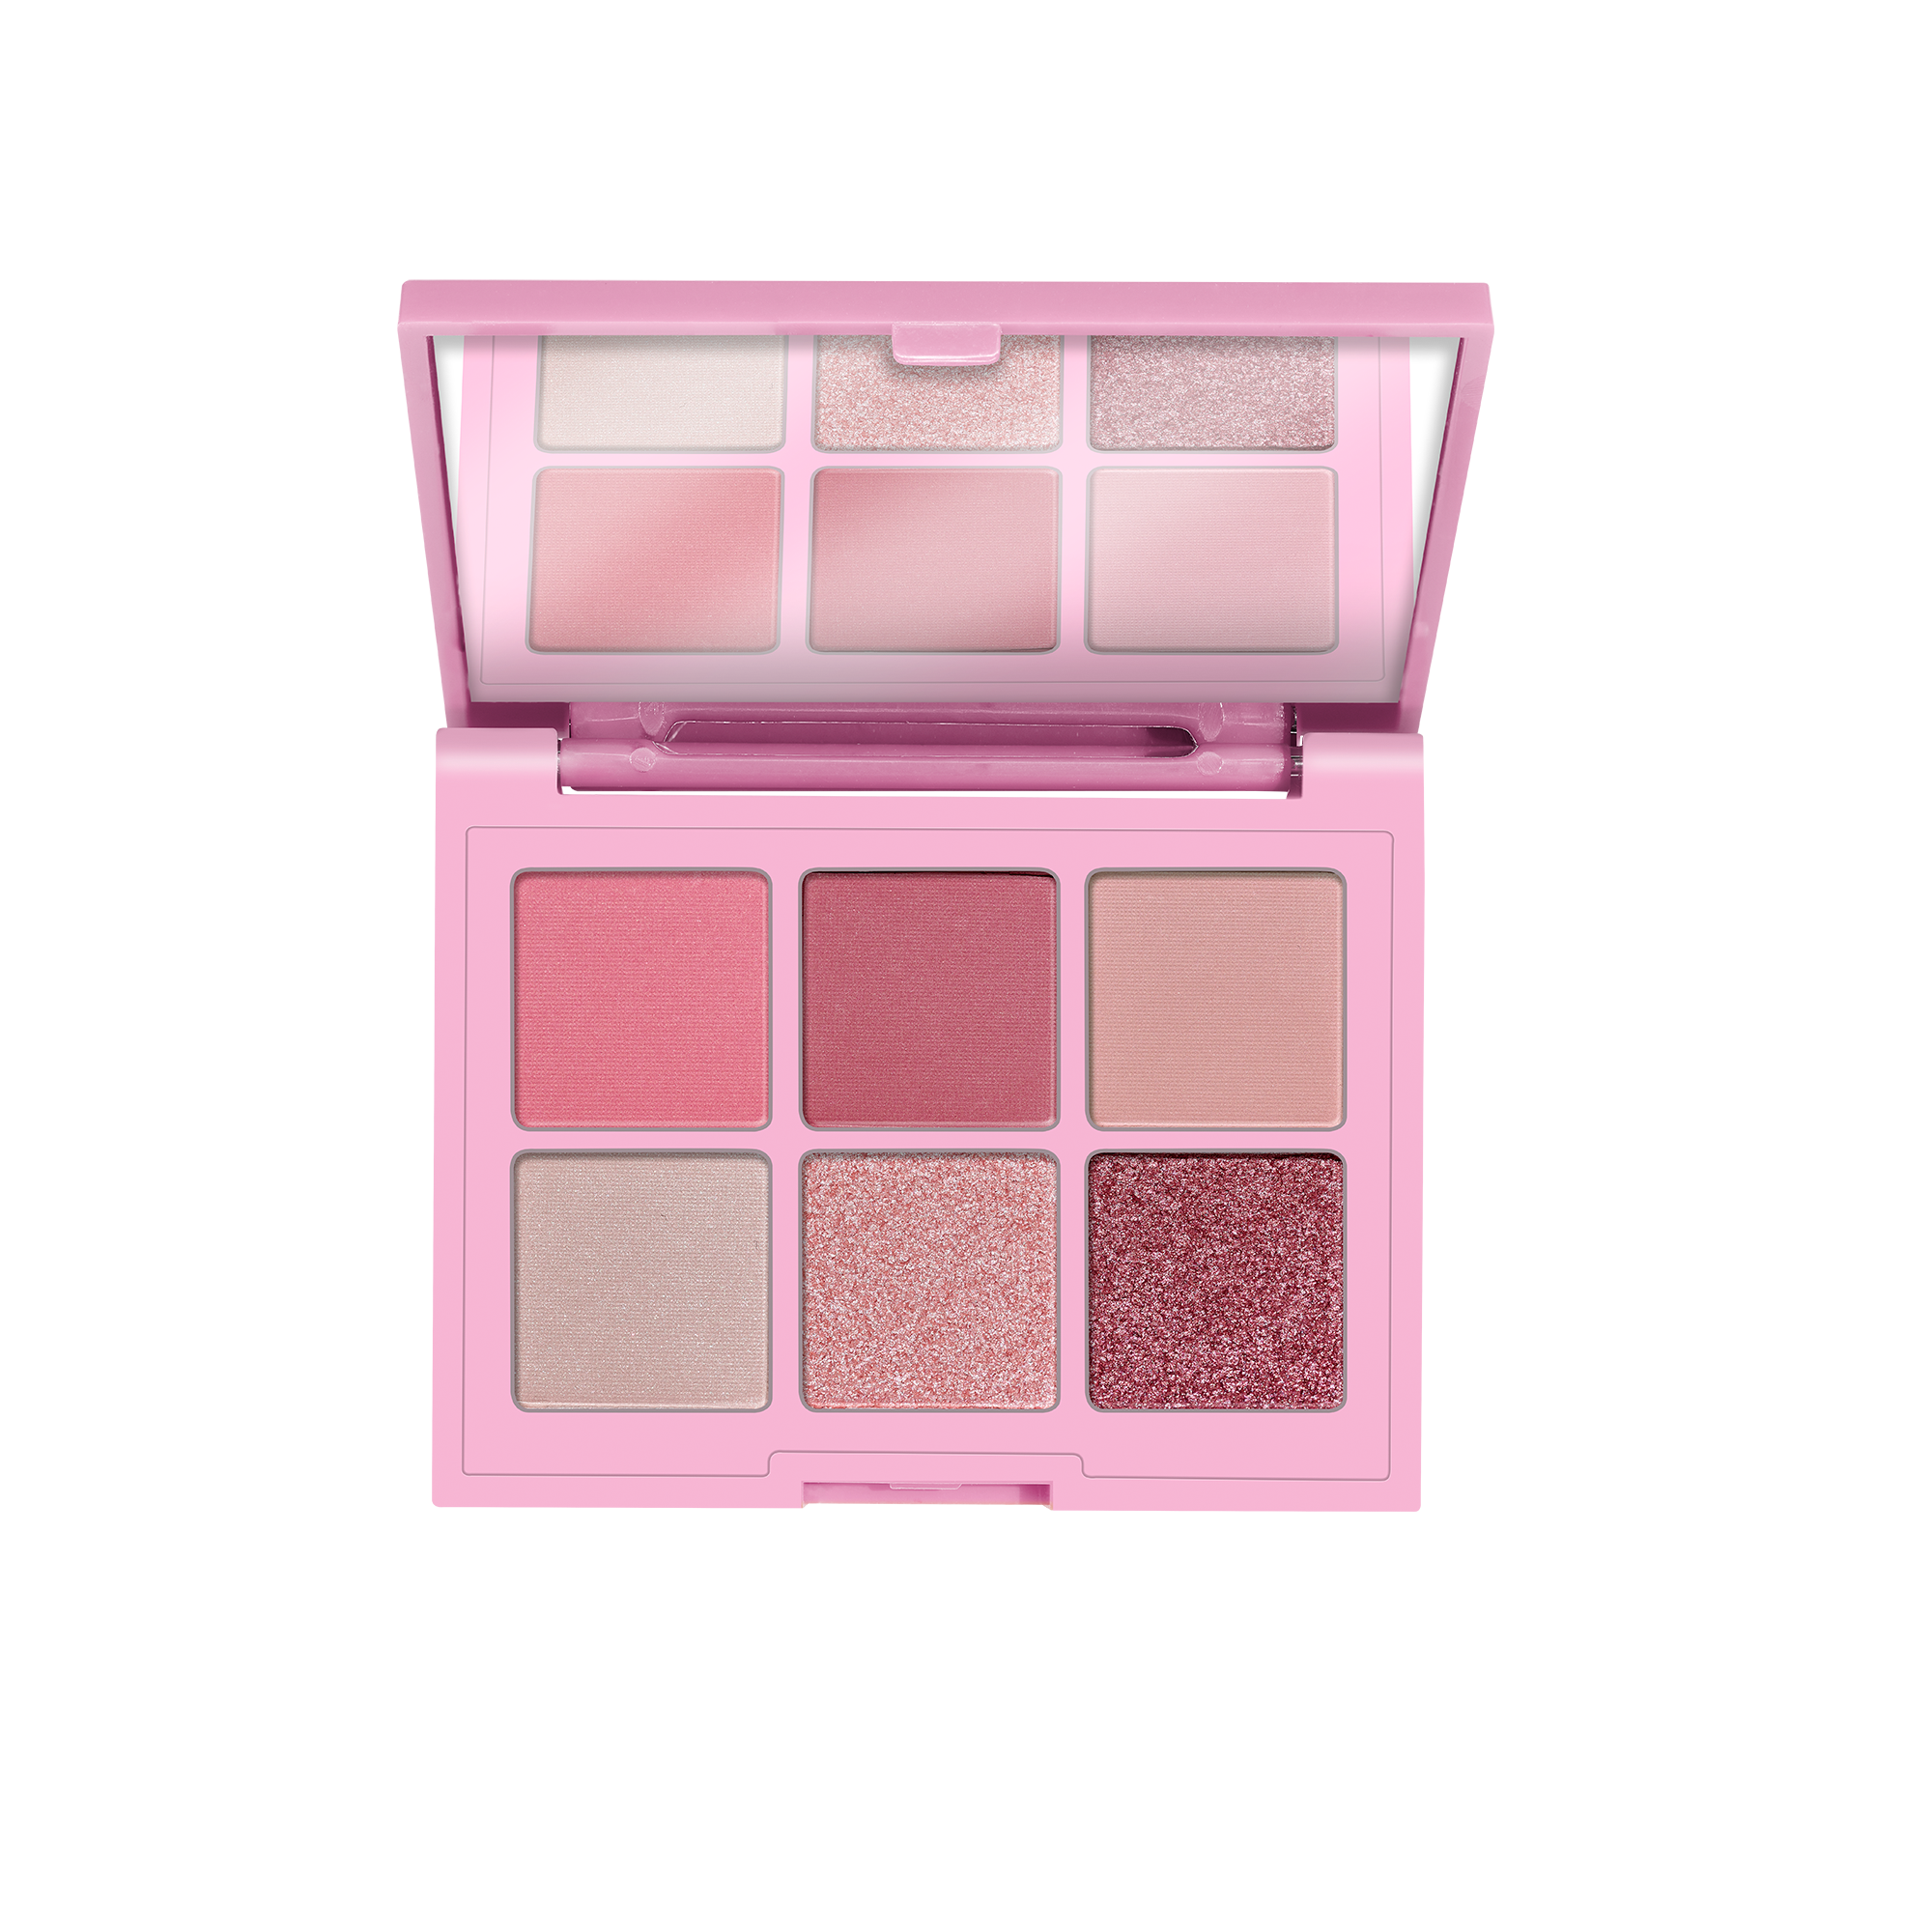 makeup essence eyeshadow – will on palette my go ROSE